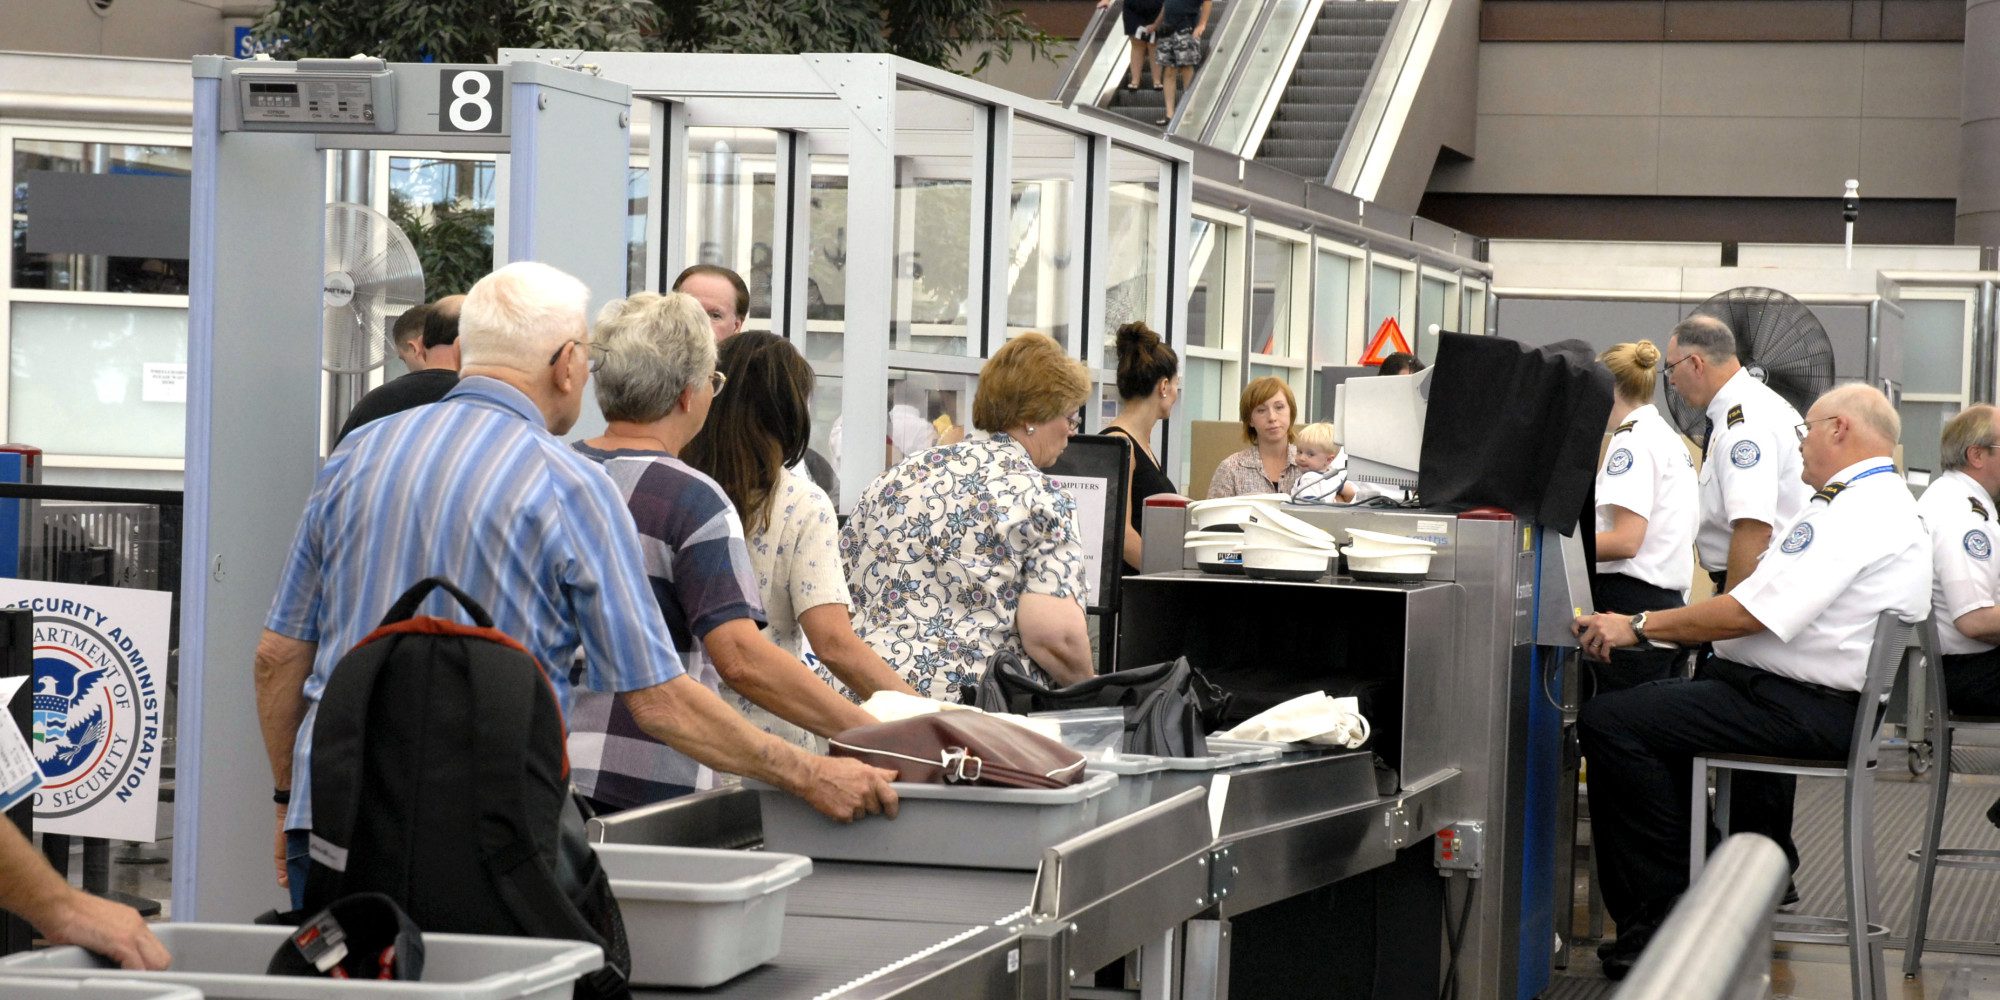 people at an airport check-in counter